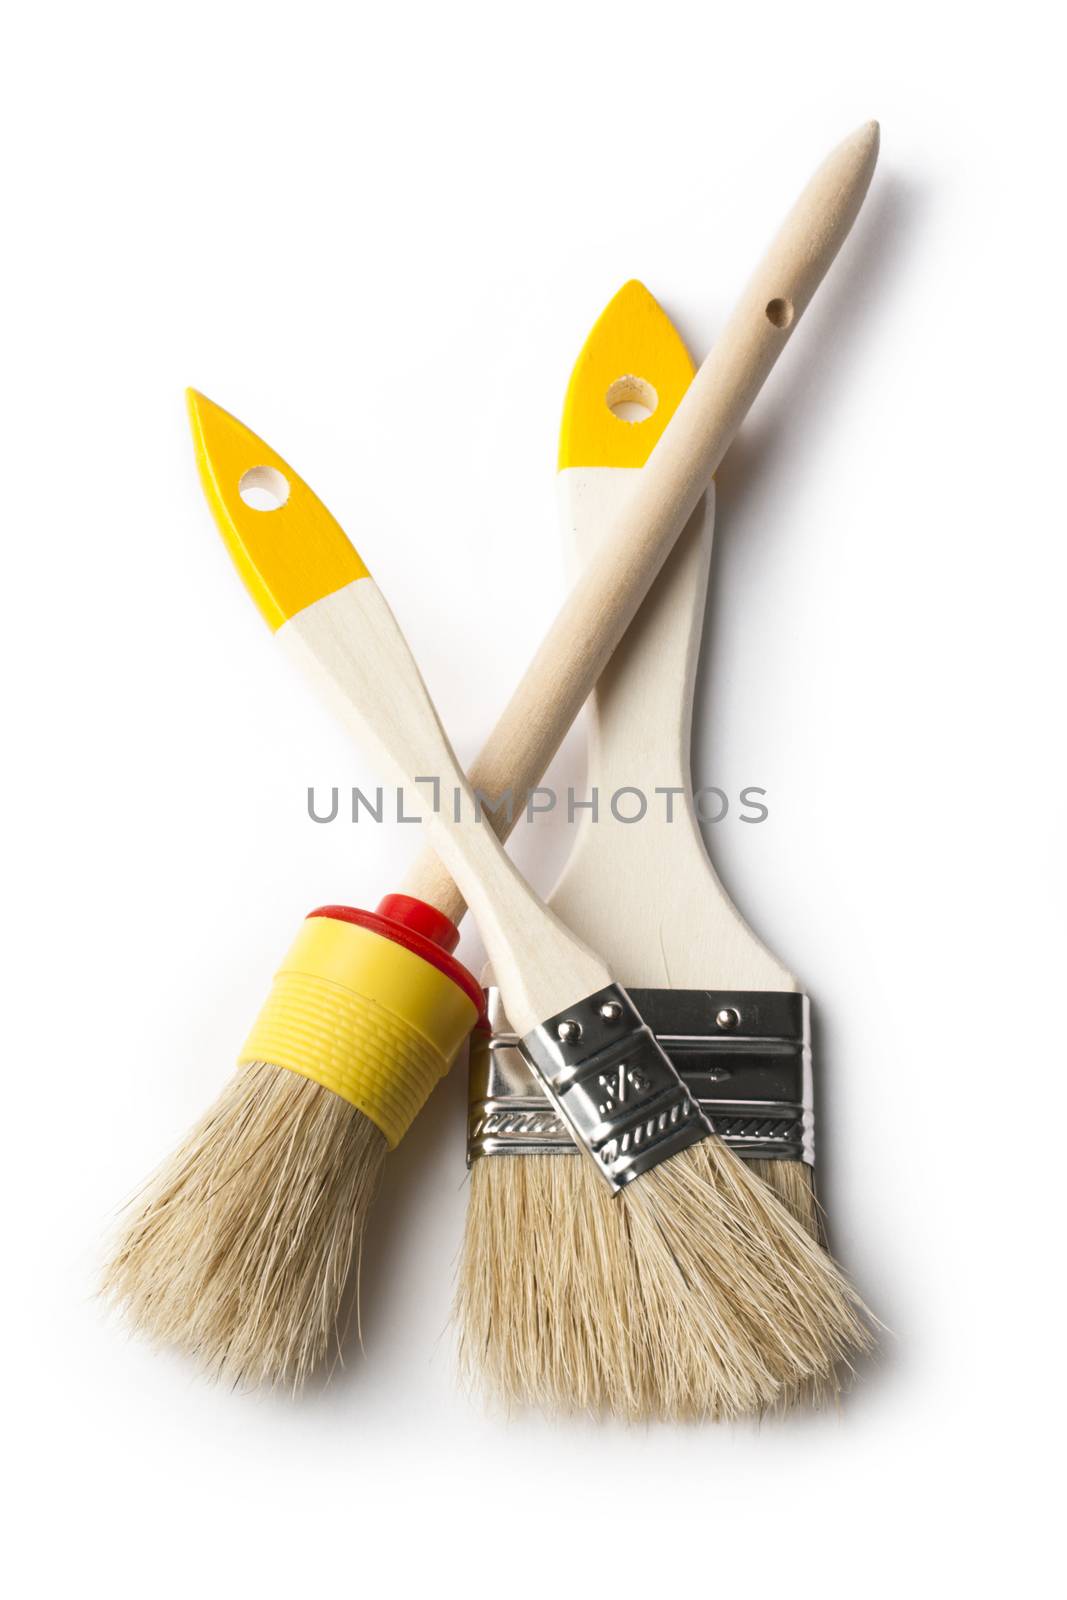 Paint brushes on the white background 